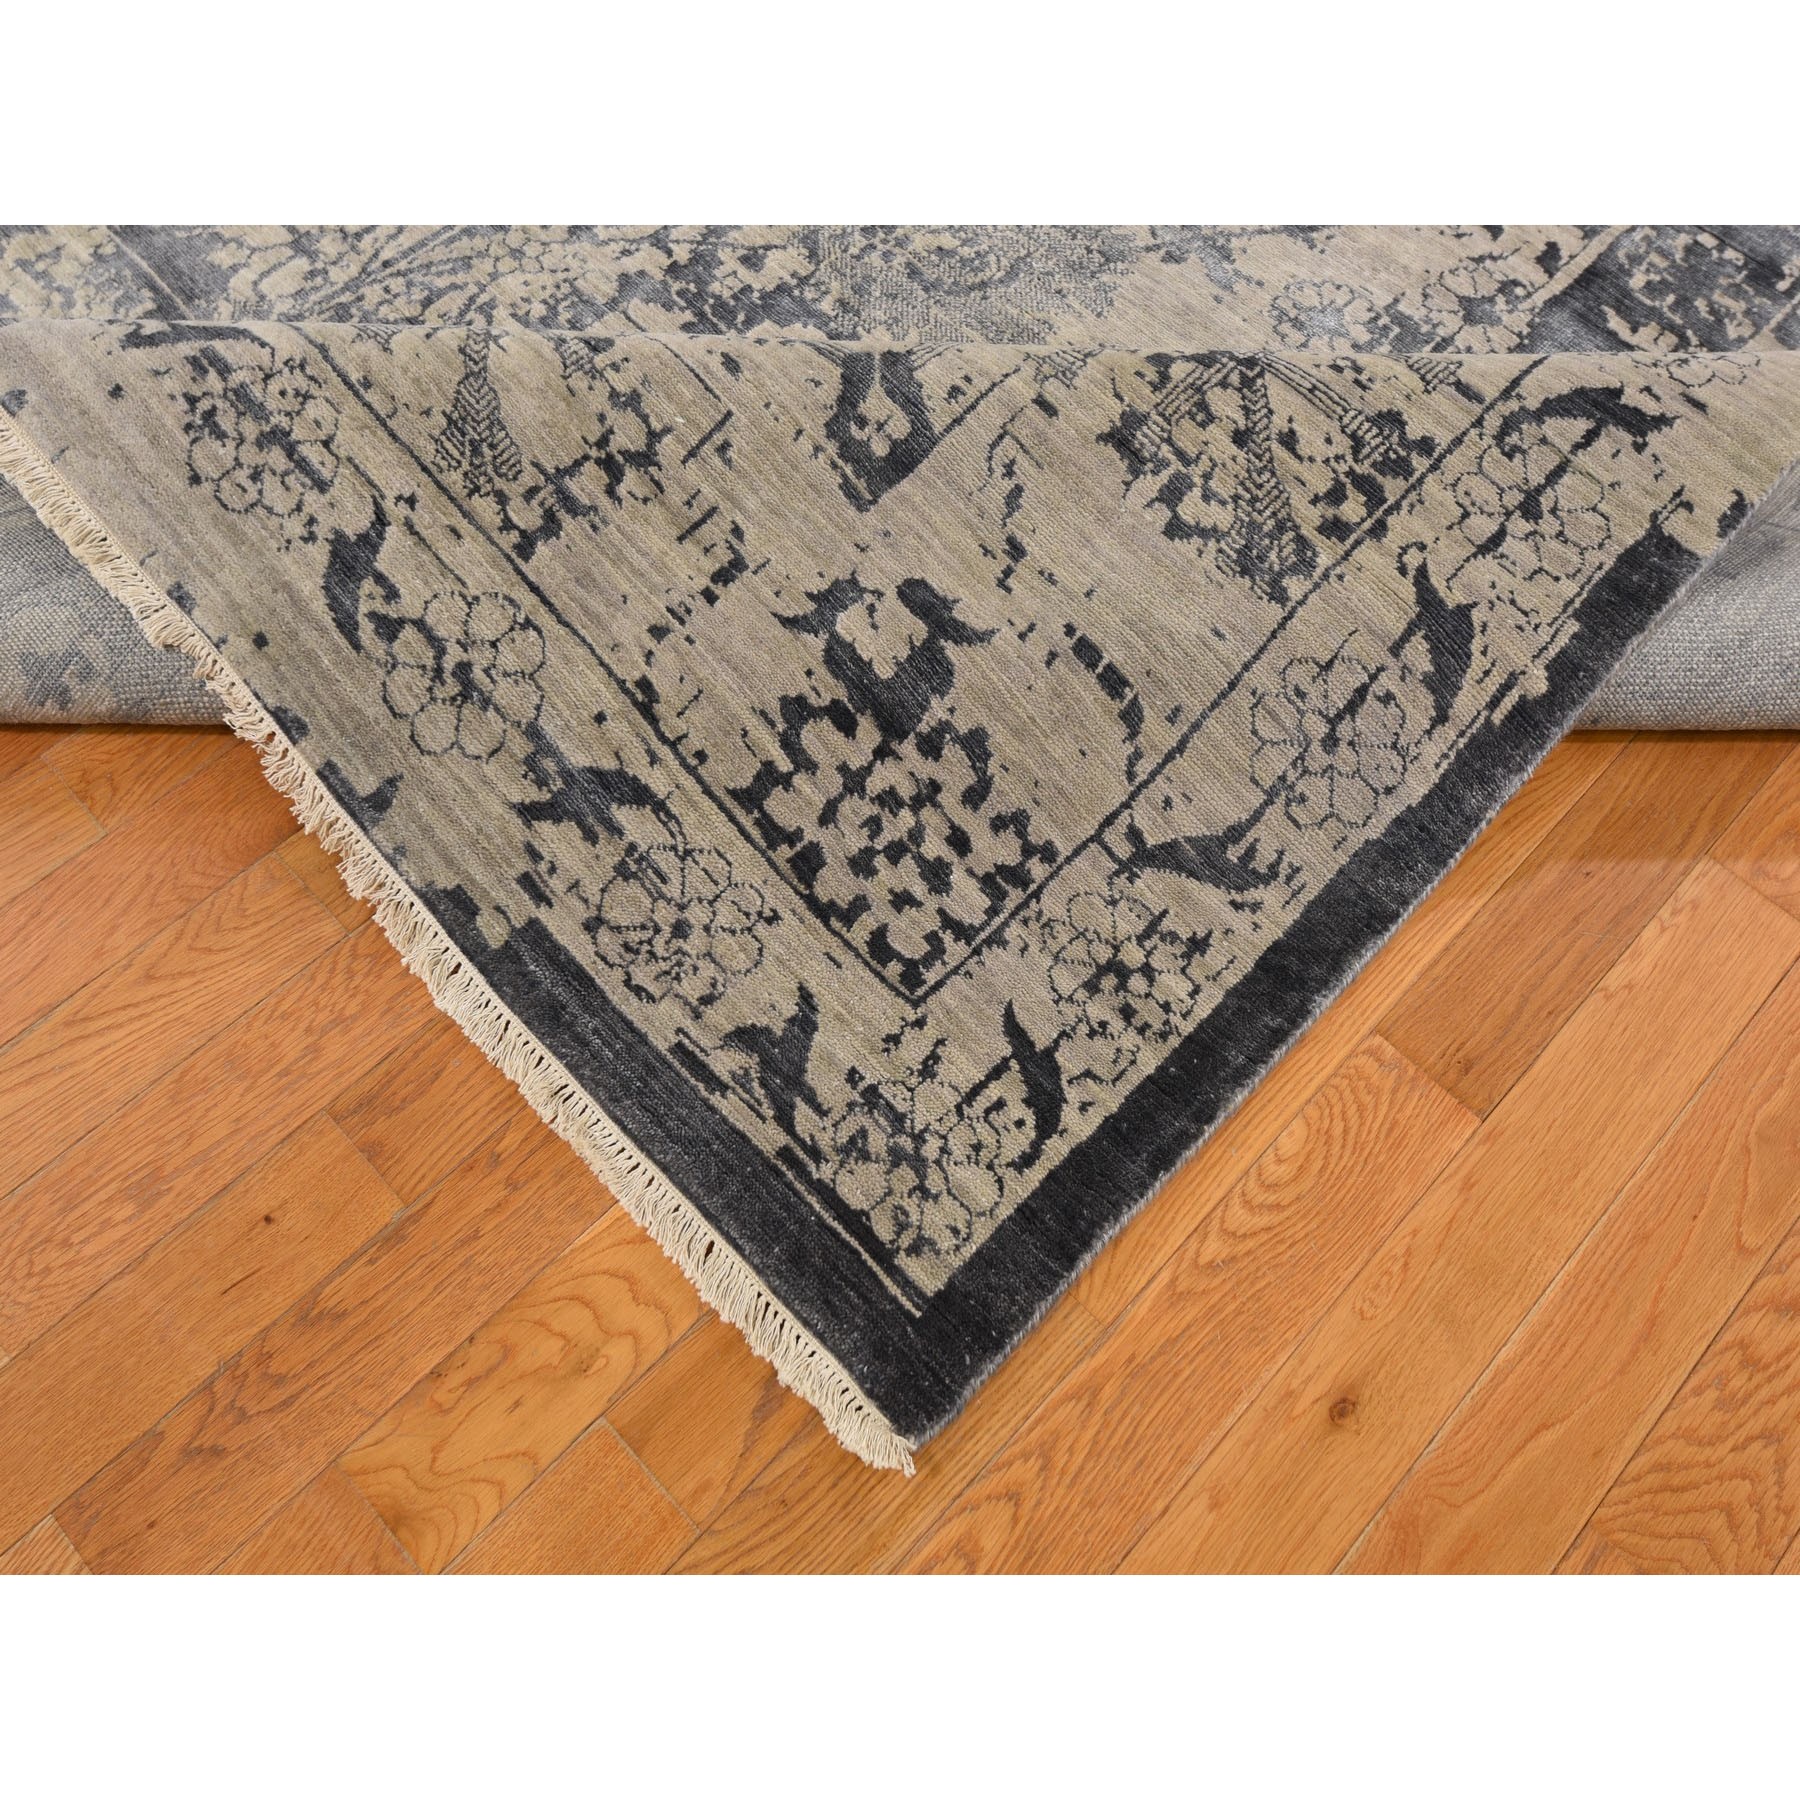 9-1 x12- Gray Wool And Silk Transitional Erased Persian Design Hand Knotted Oriental Rug 